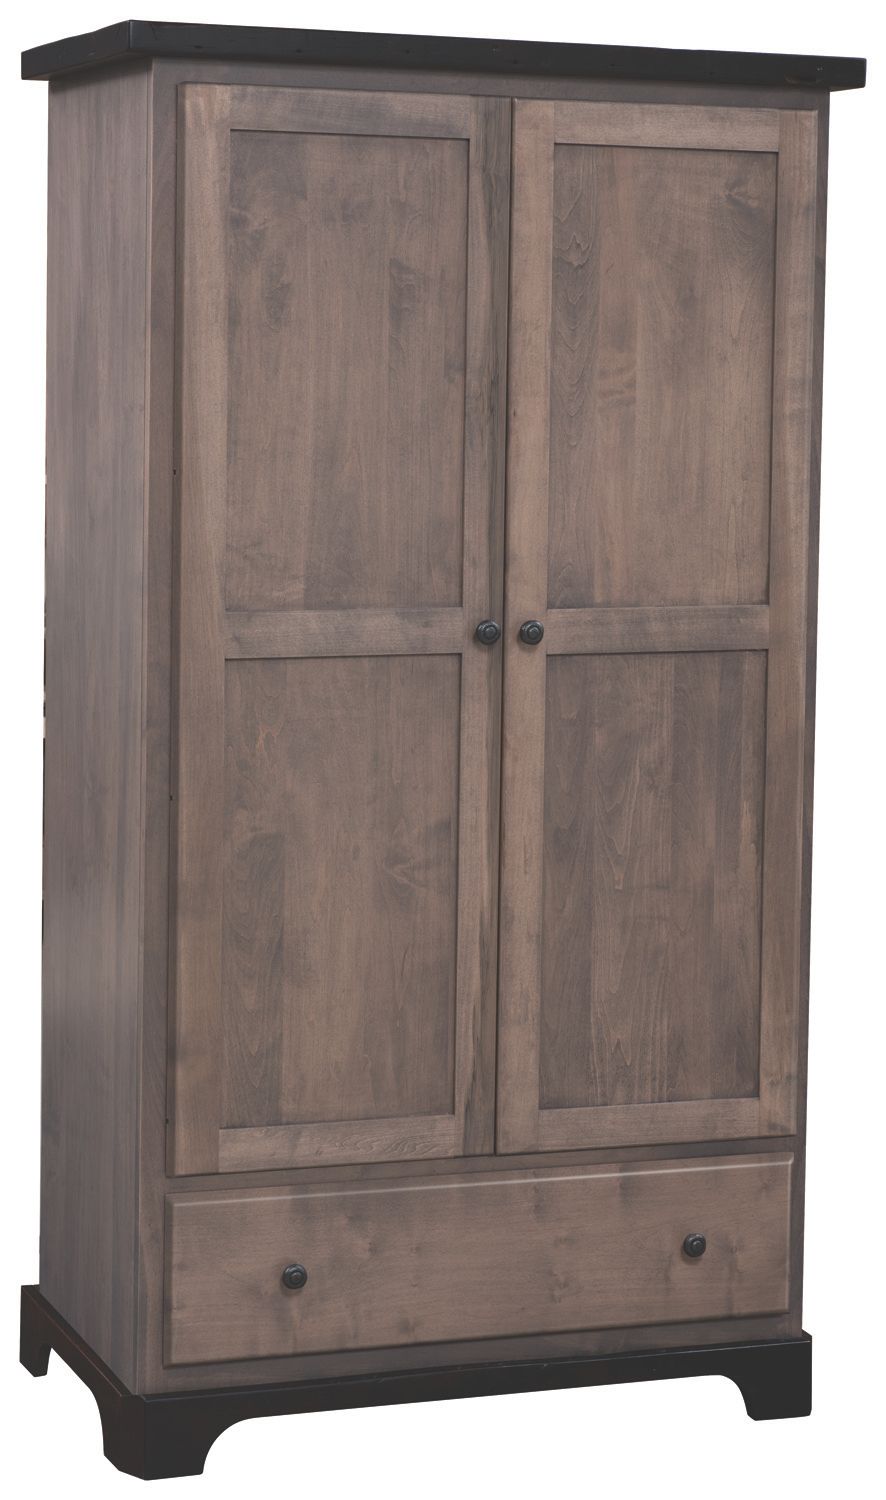 Fw manchester armoire 711 cp